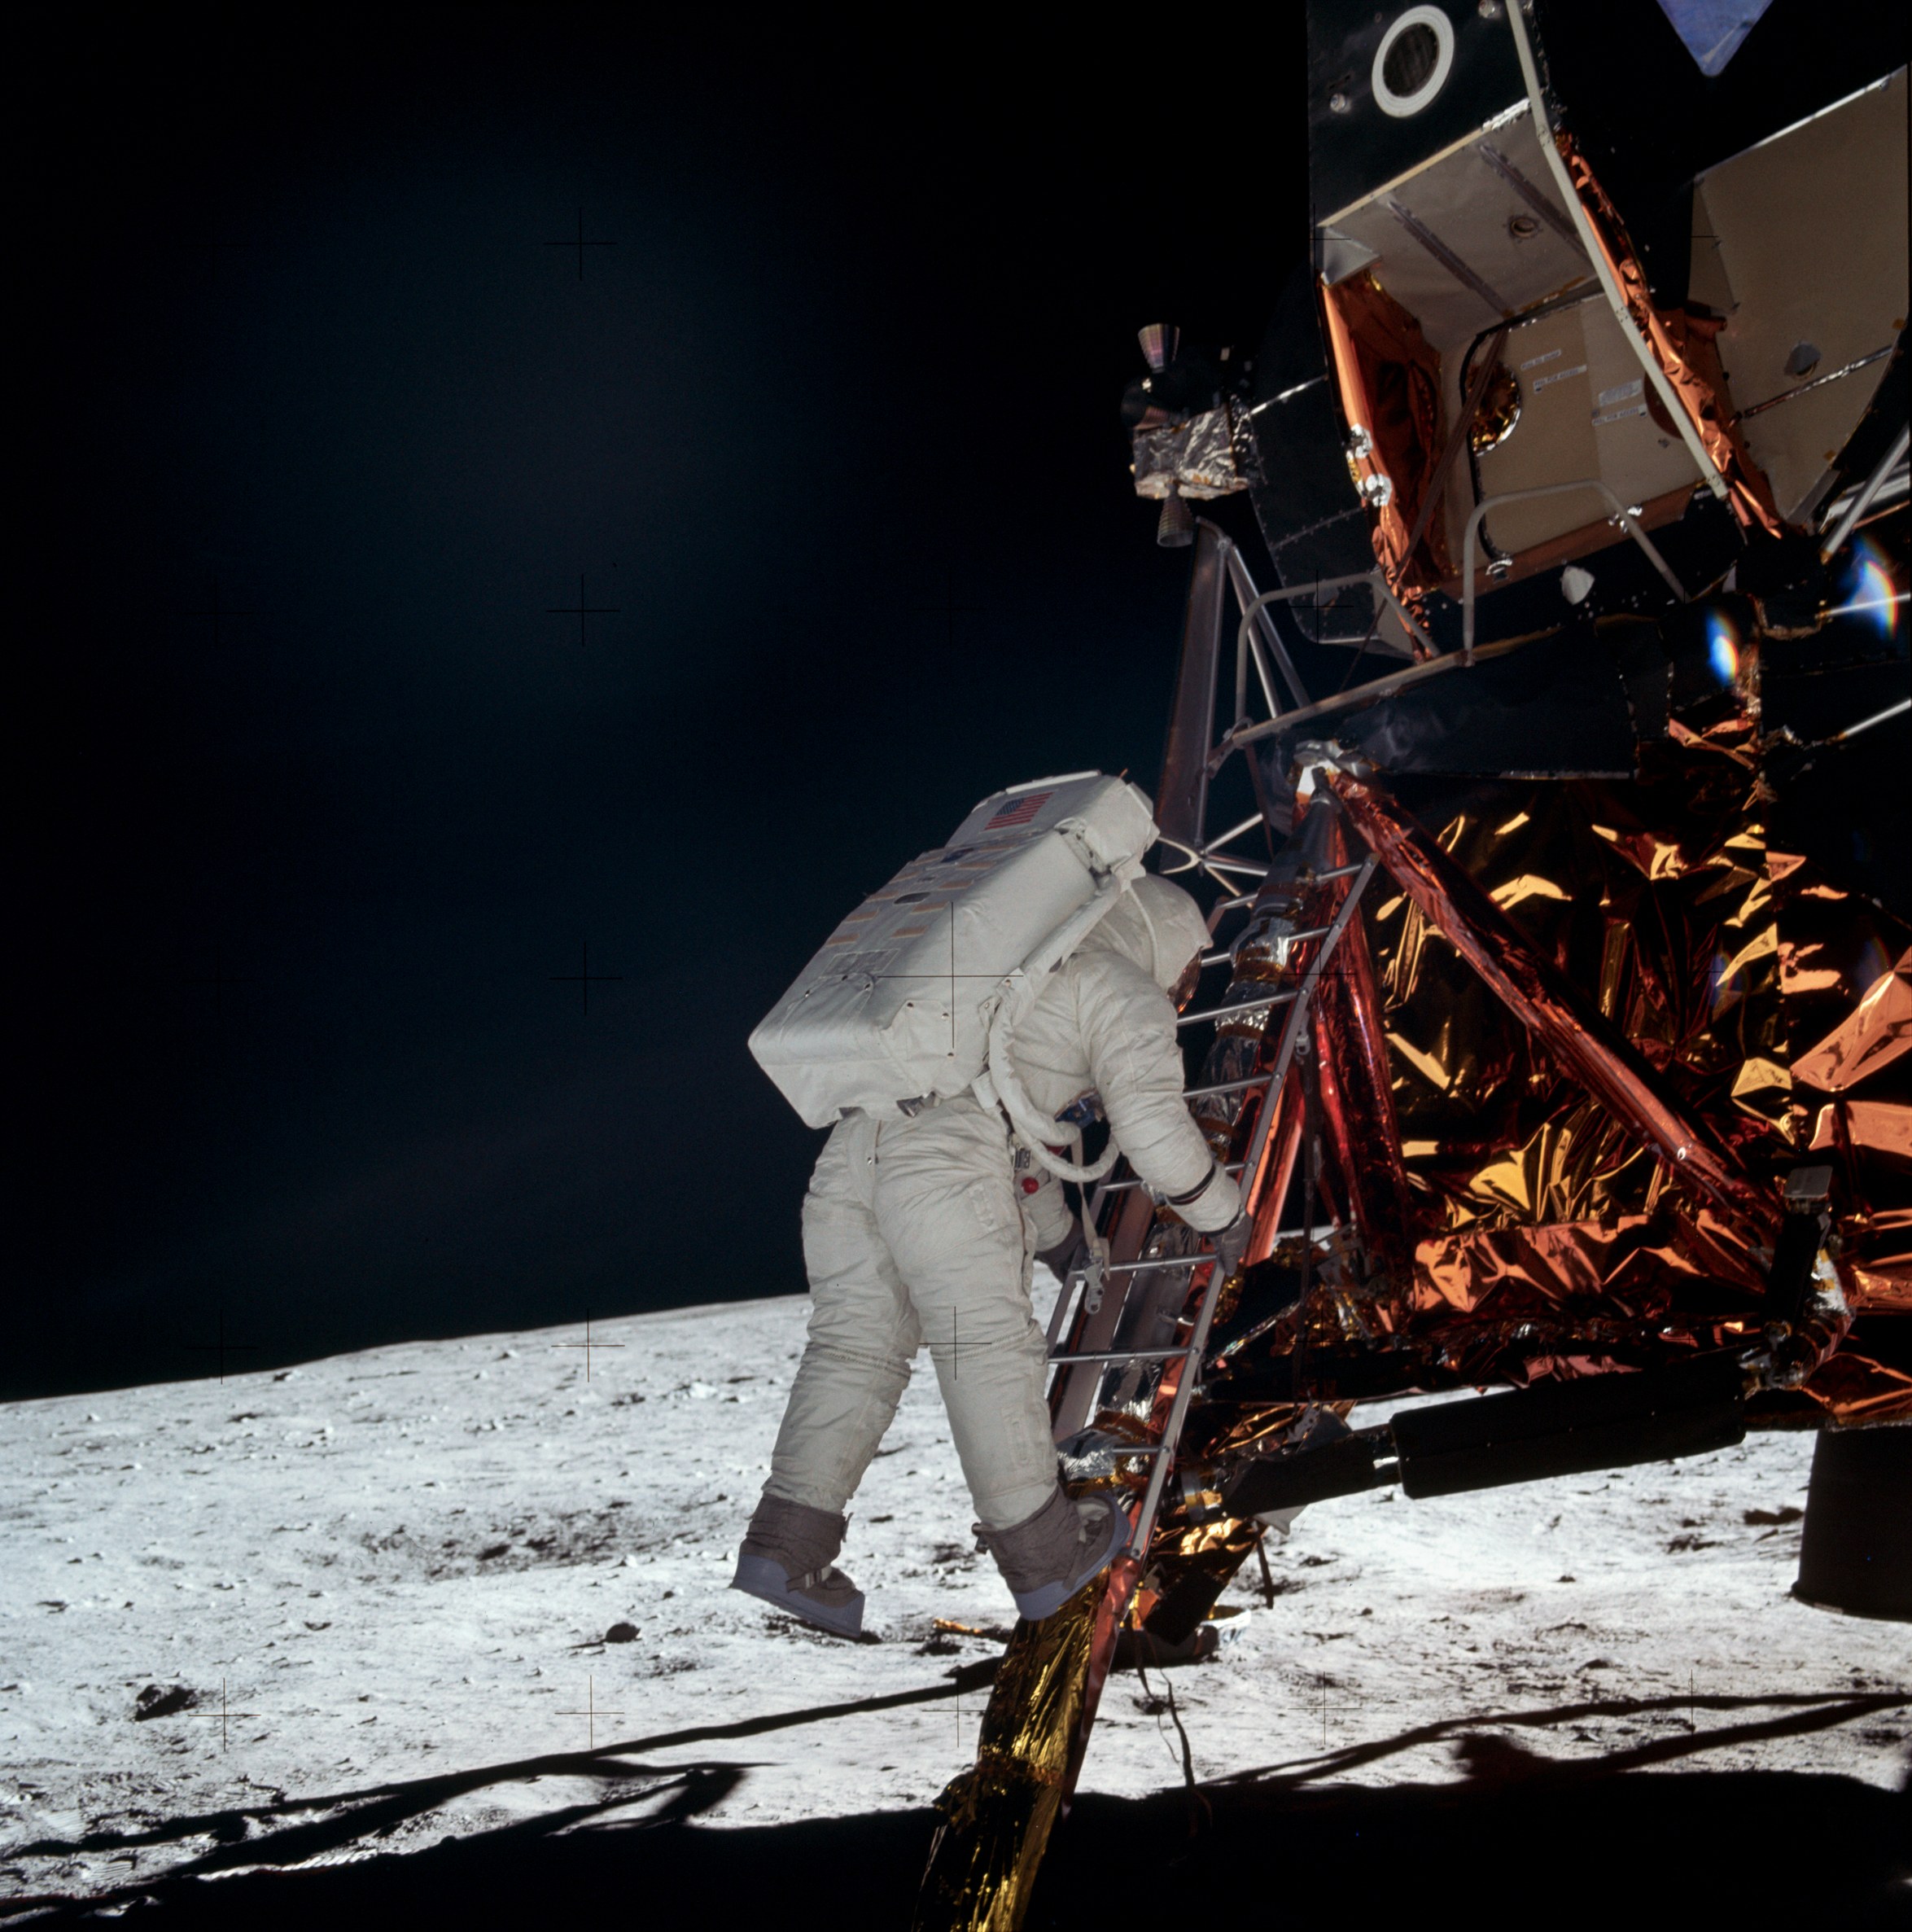 Astronaut Buzz Aldrin comes down the Eagle lunar module ladder during the extravehicular activity stage on the Moon surface on July 21, 1969.